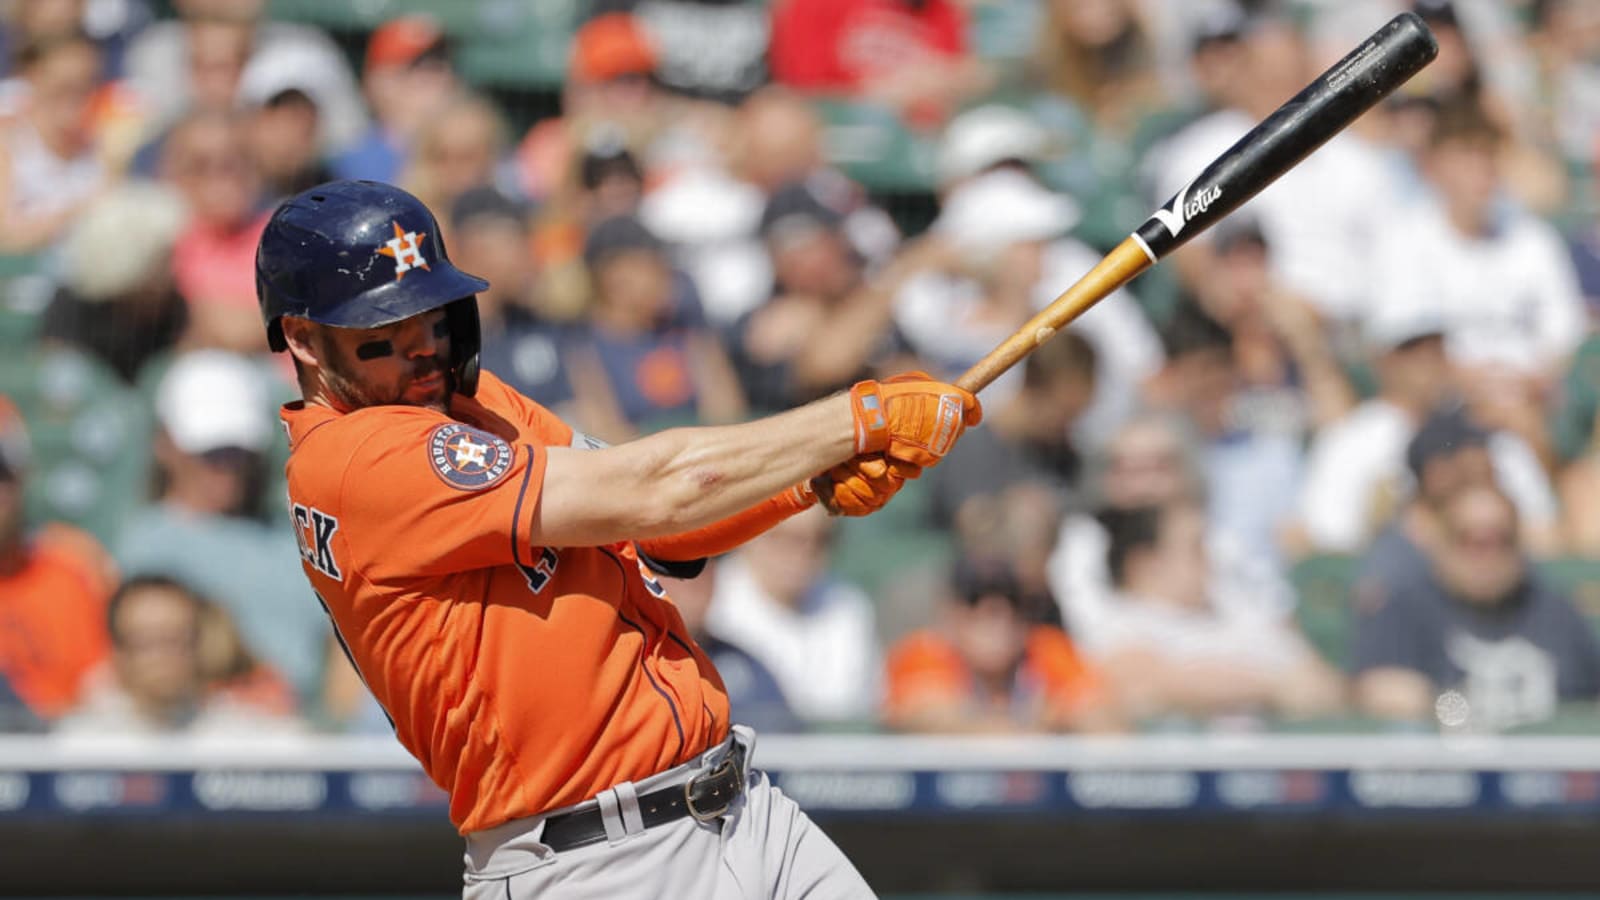 Astros Young Star Could Become Their Center Fielder of the Future